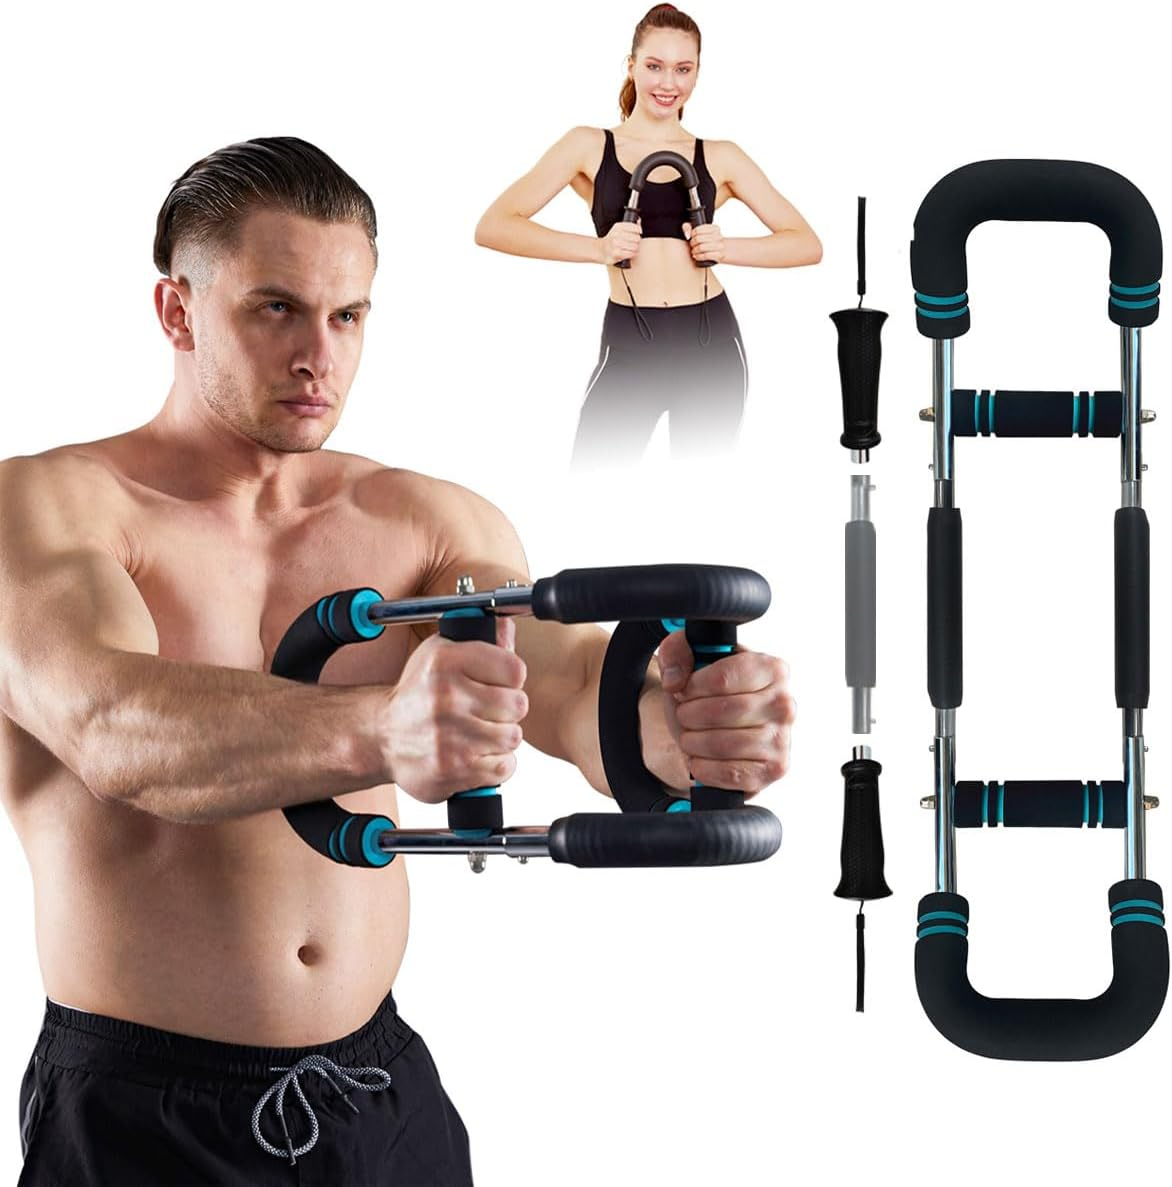 HOTWAVE Ultimate Twister Arm Exerciser.Adjustable Chest Expander, Forearm Enhanced Exercise Strengthener.Upper Body Strength Training Machine.Portable Spring Resistance Home Workout Equipment